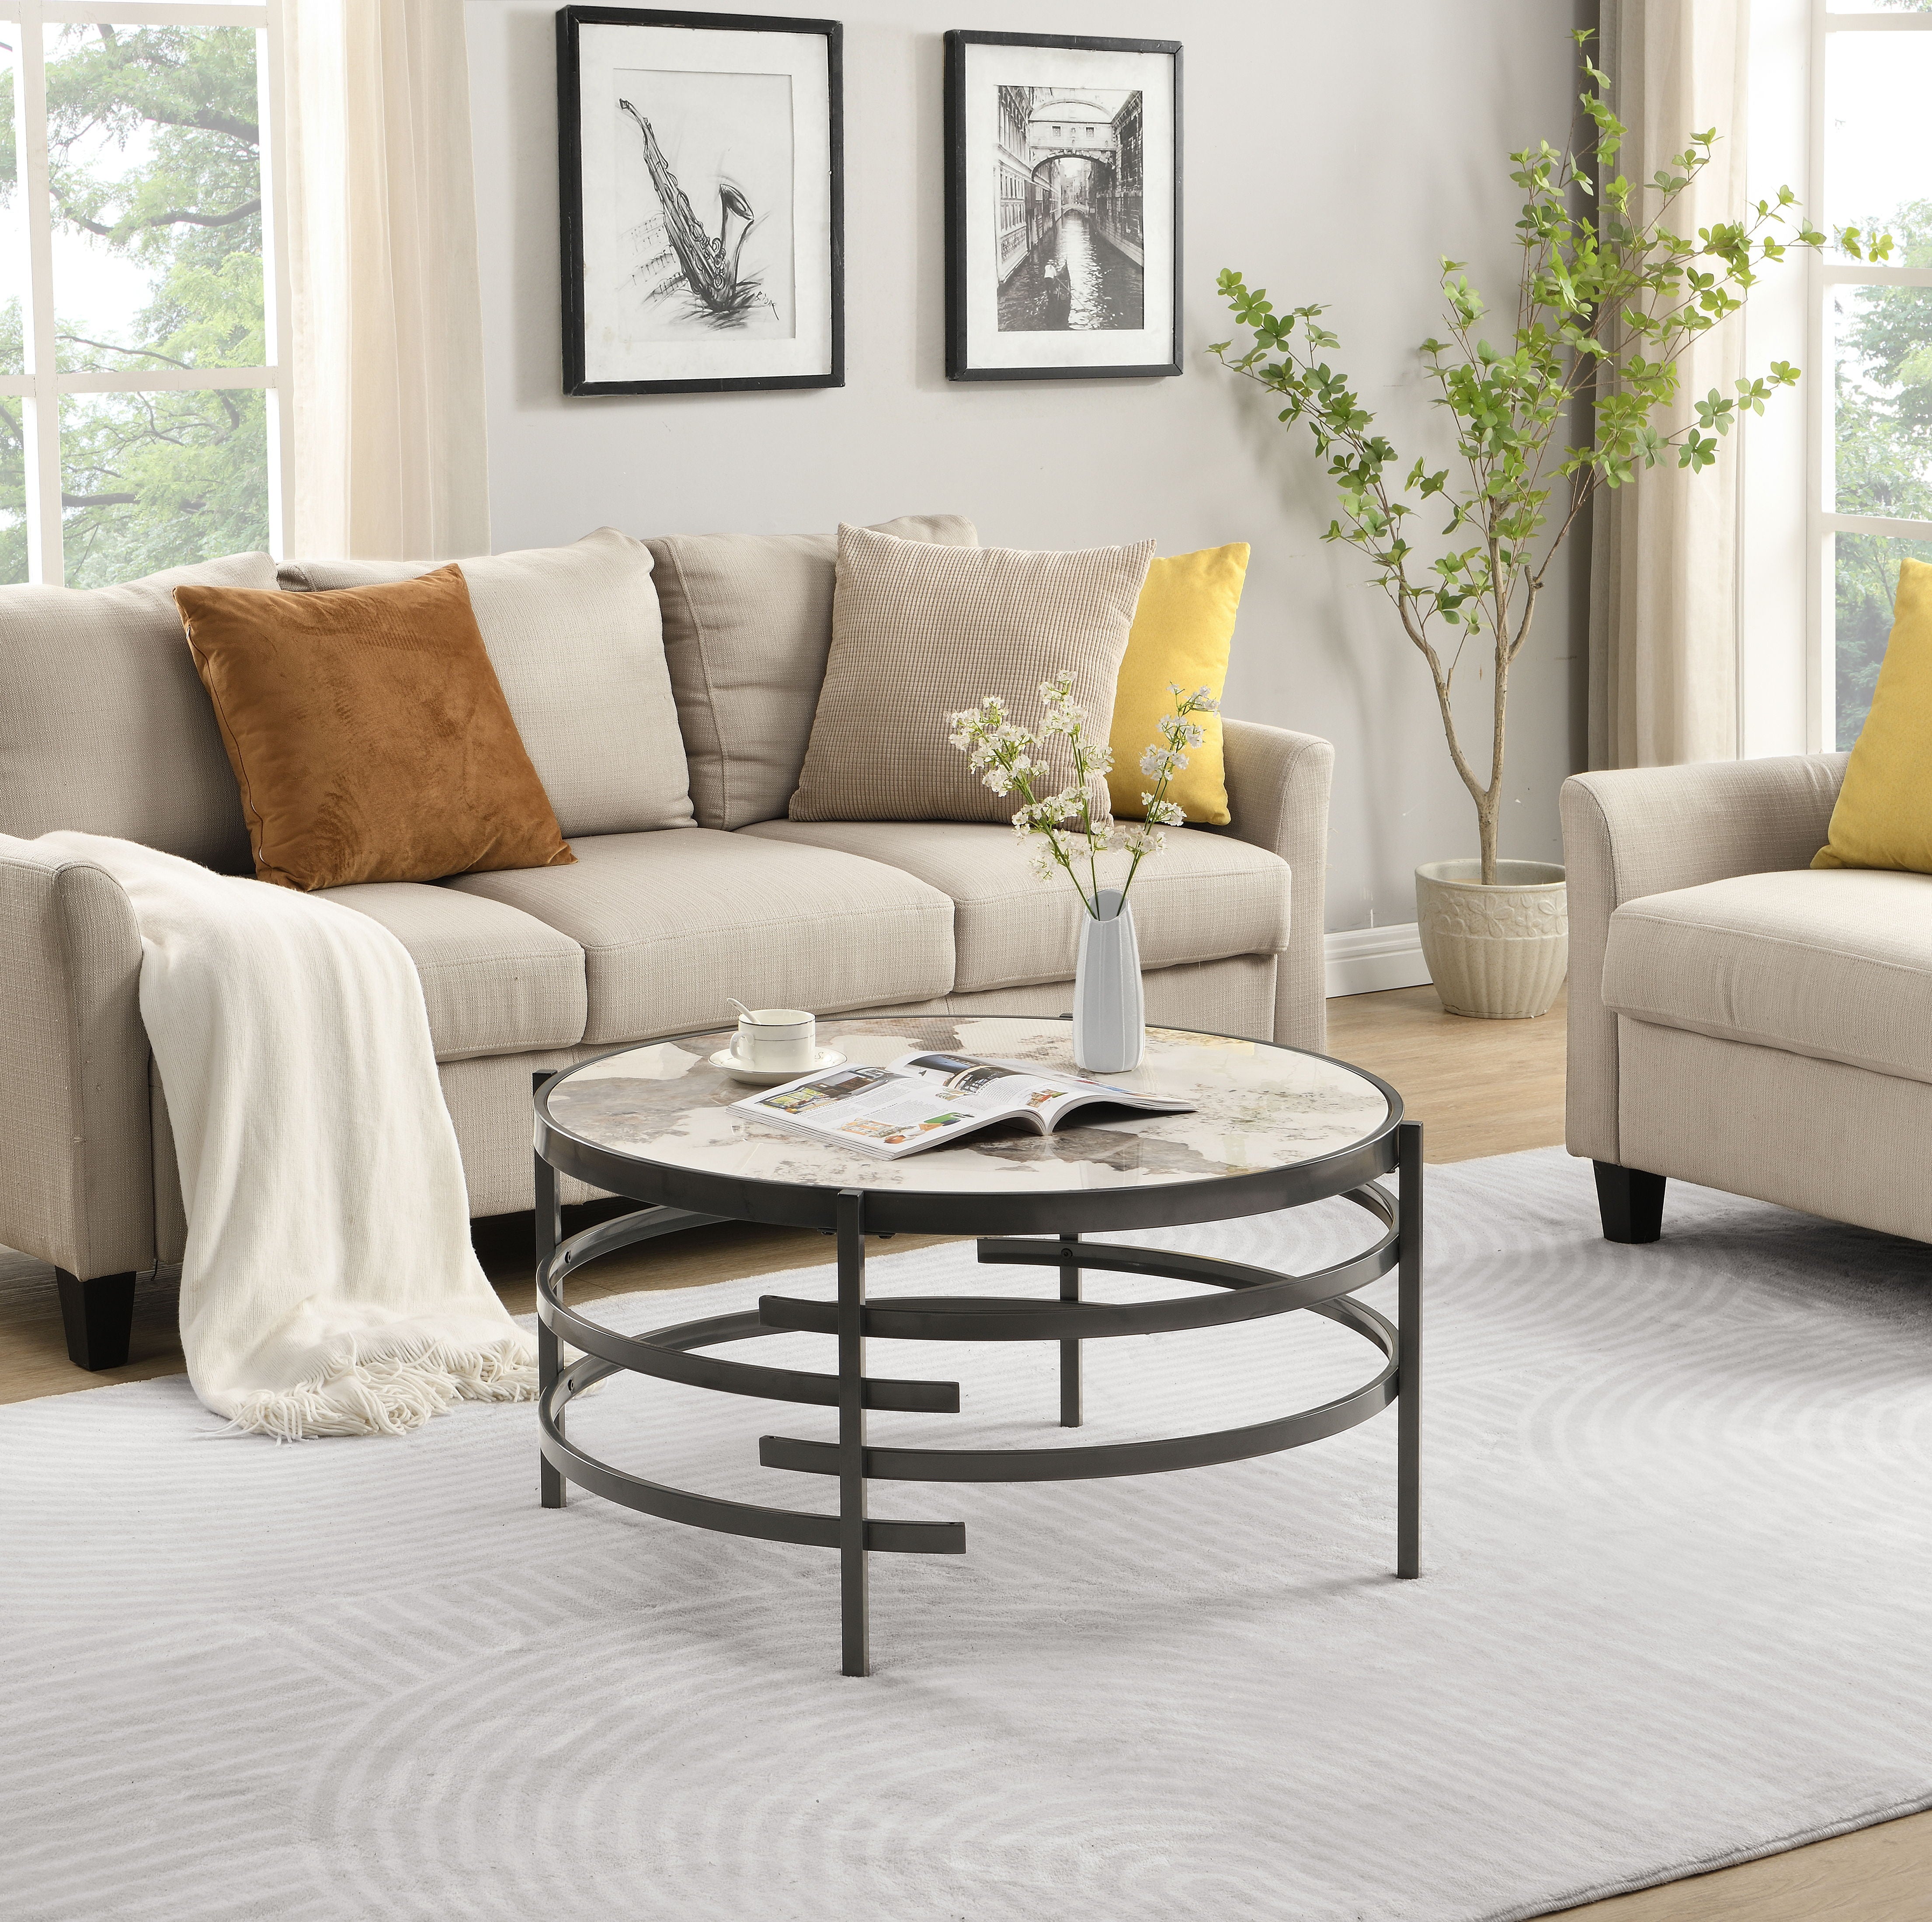 Round Coffee Table With Sintered Stone Top&Sturdy Metal Frame, Modern Coffee Table For Living Room, Darker Gray